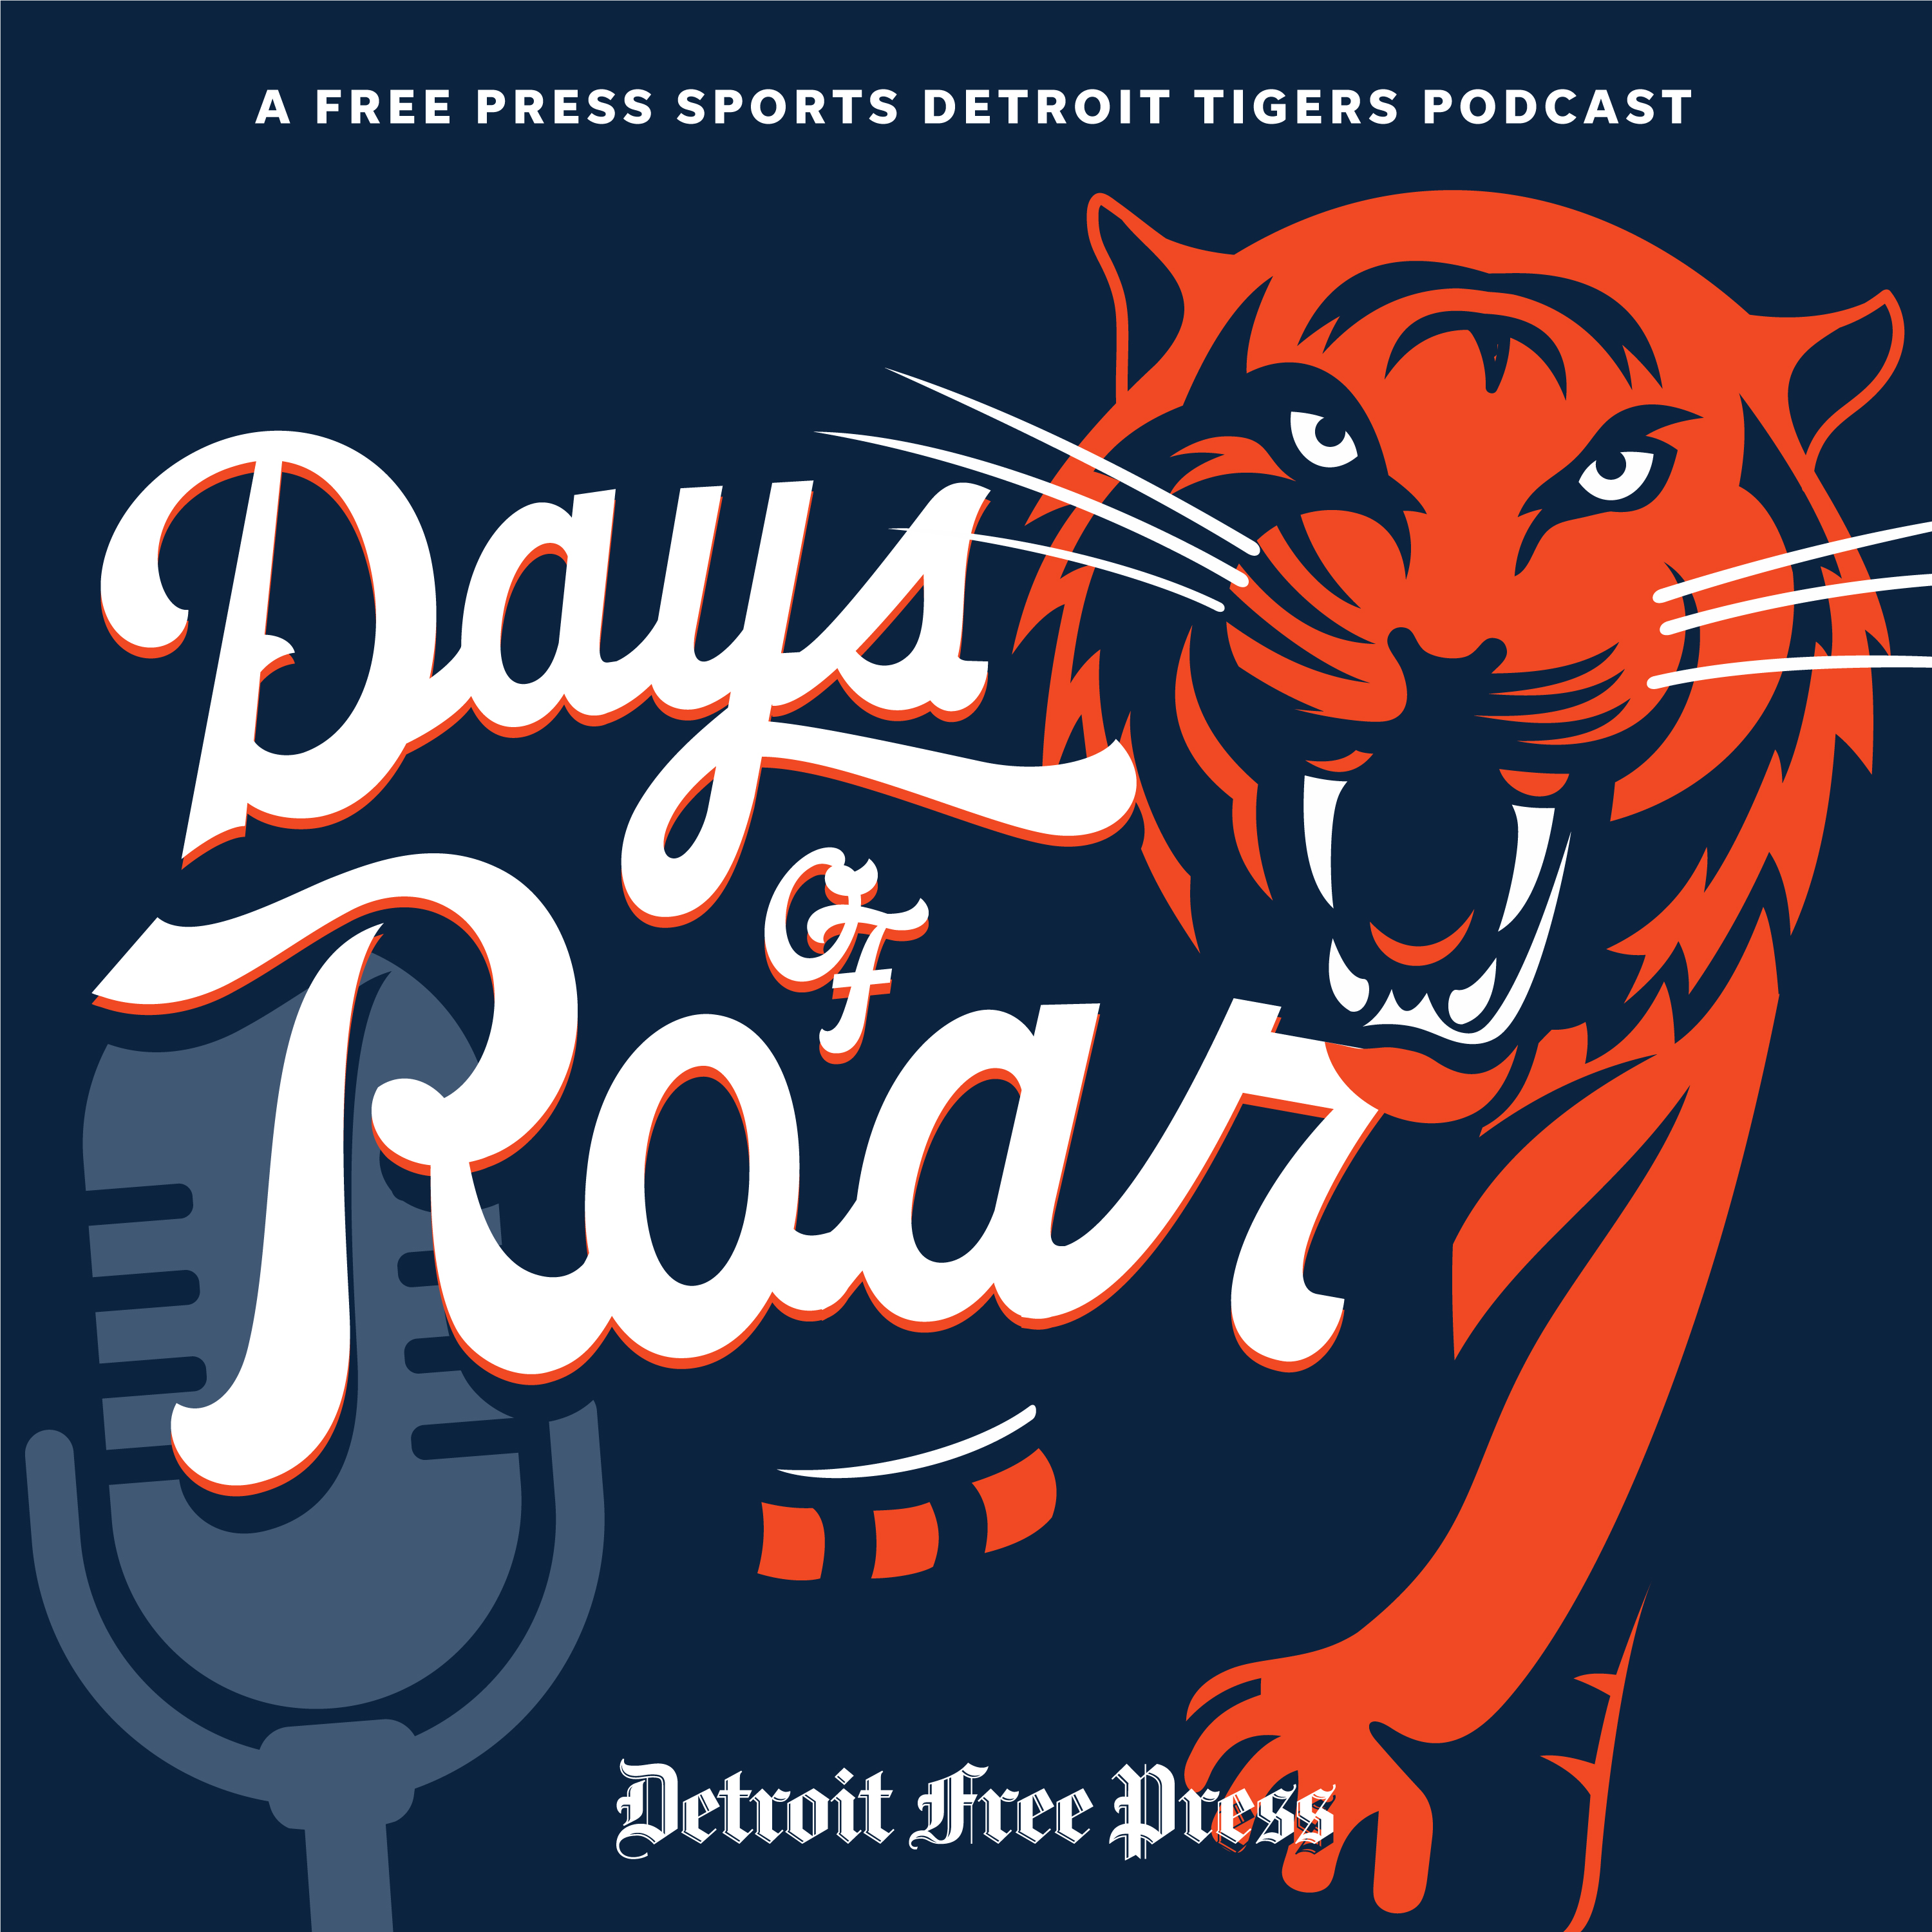 Upcoming series will tell us if Detroit Tigers are for real, plus Jack Flaherty's success and a trade idea